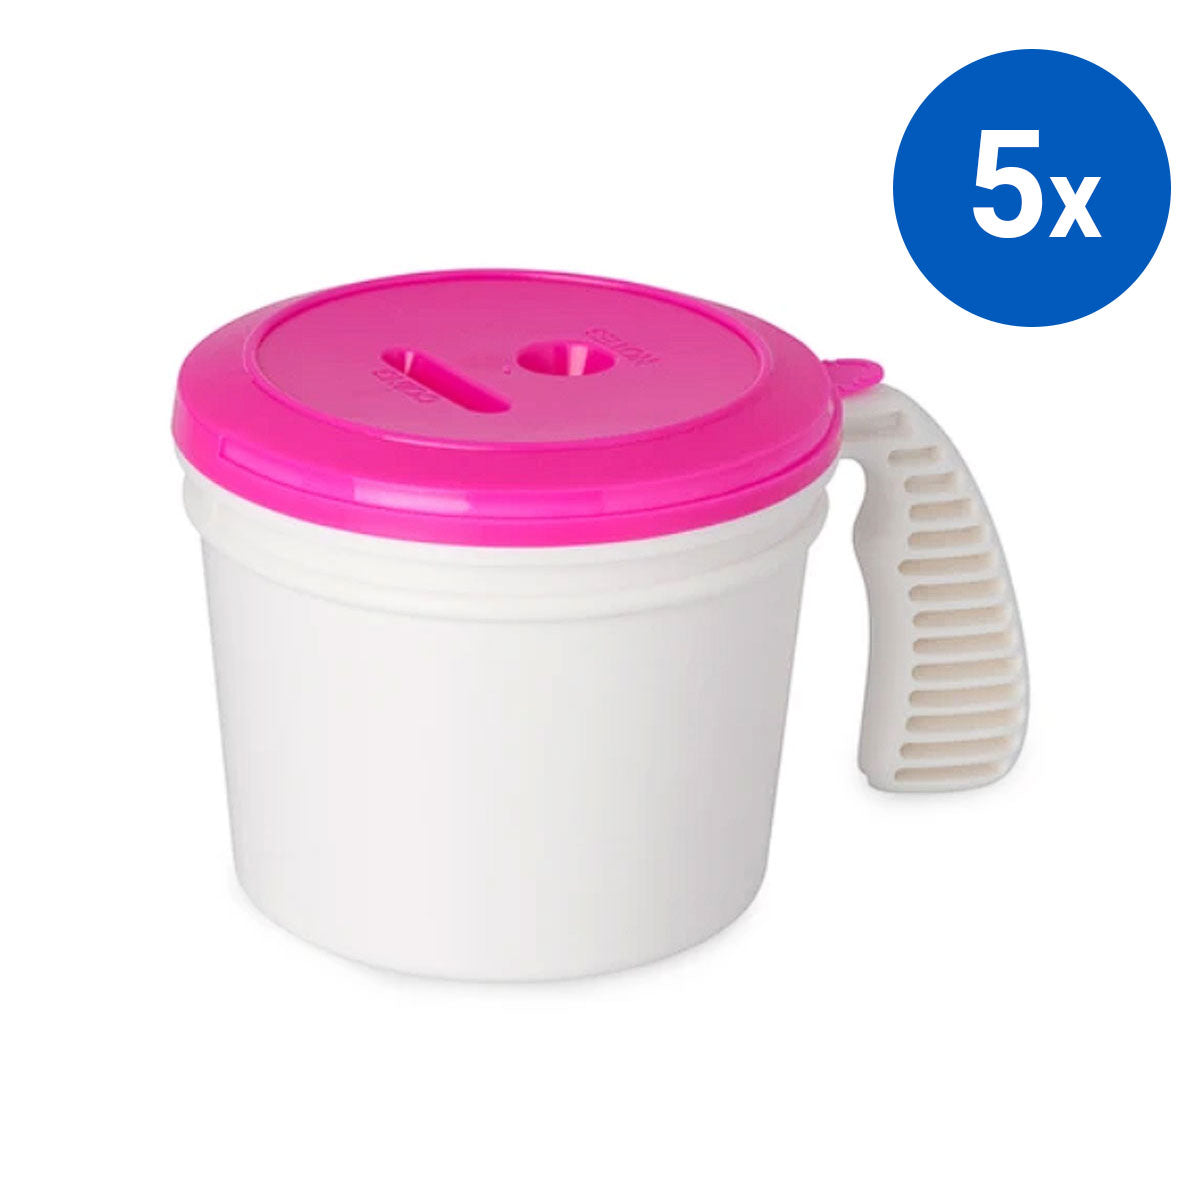 5x Collection Container Base and Standard Lid - Pink